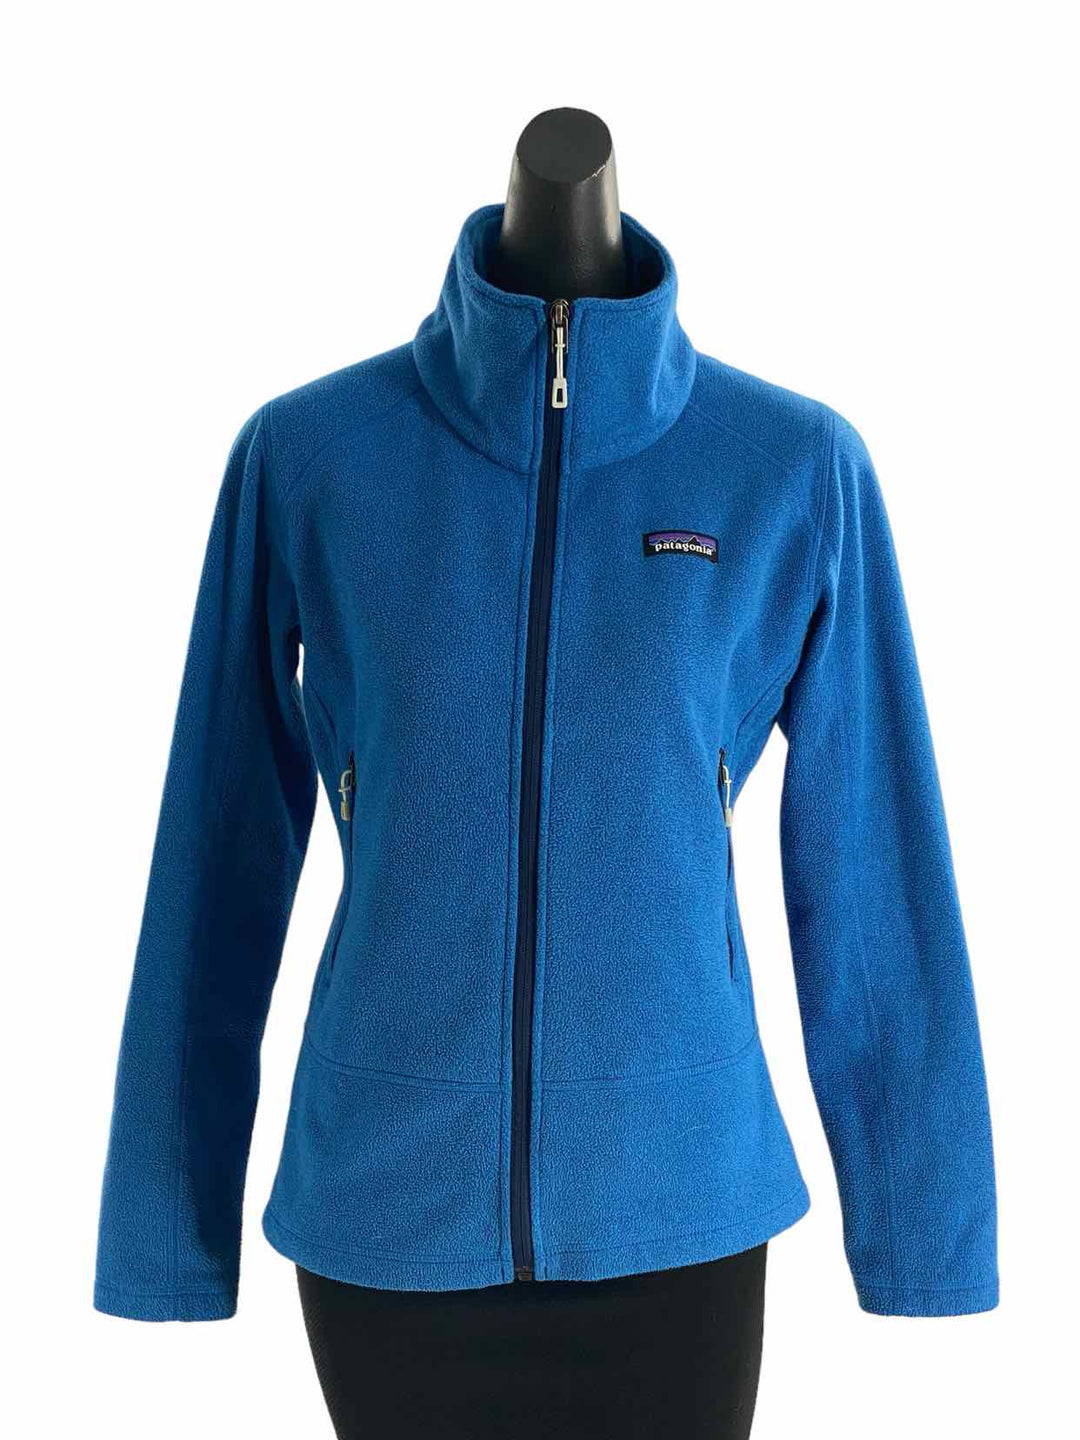 Patagonia Size S Blue Jacket (Outdoor)